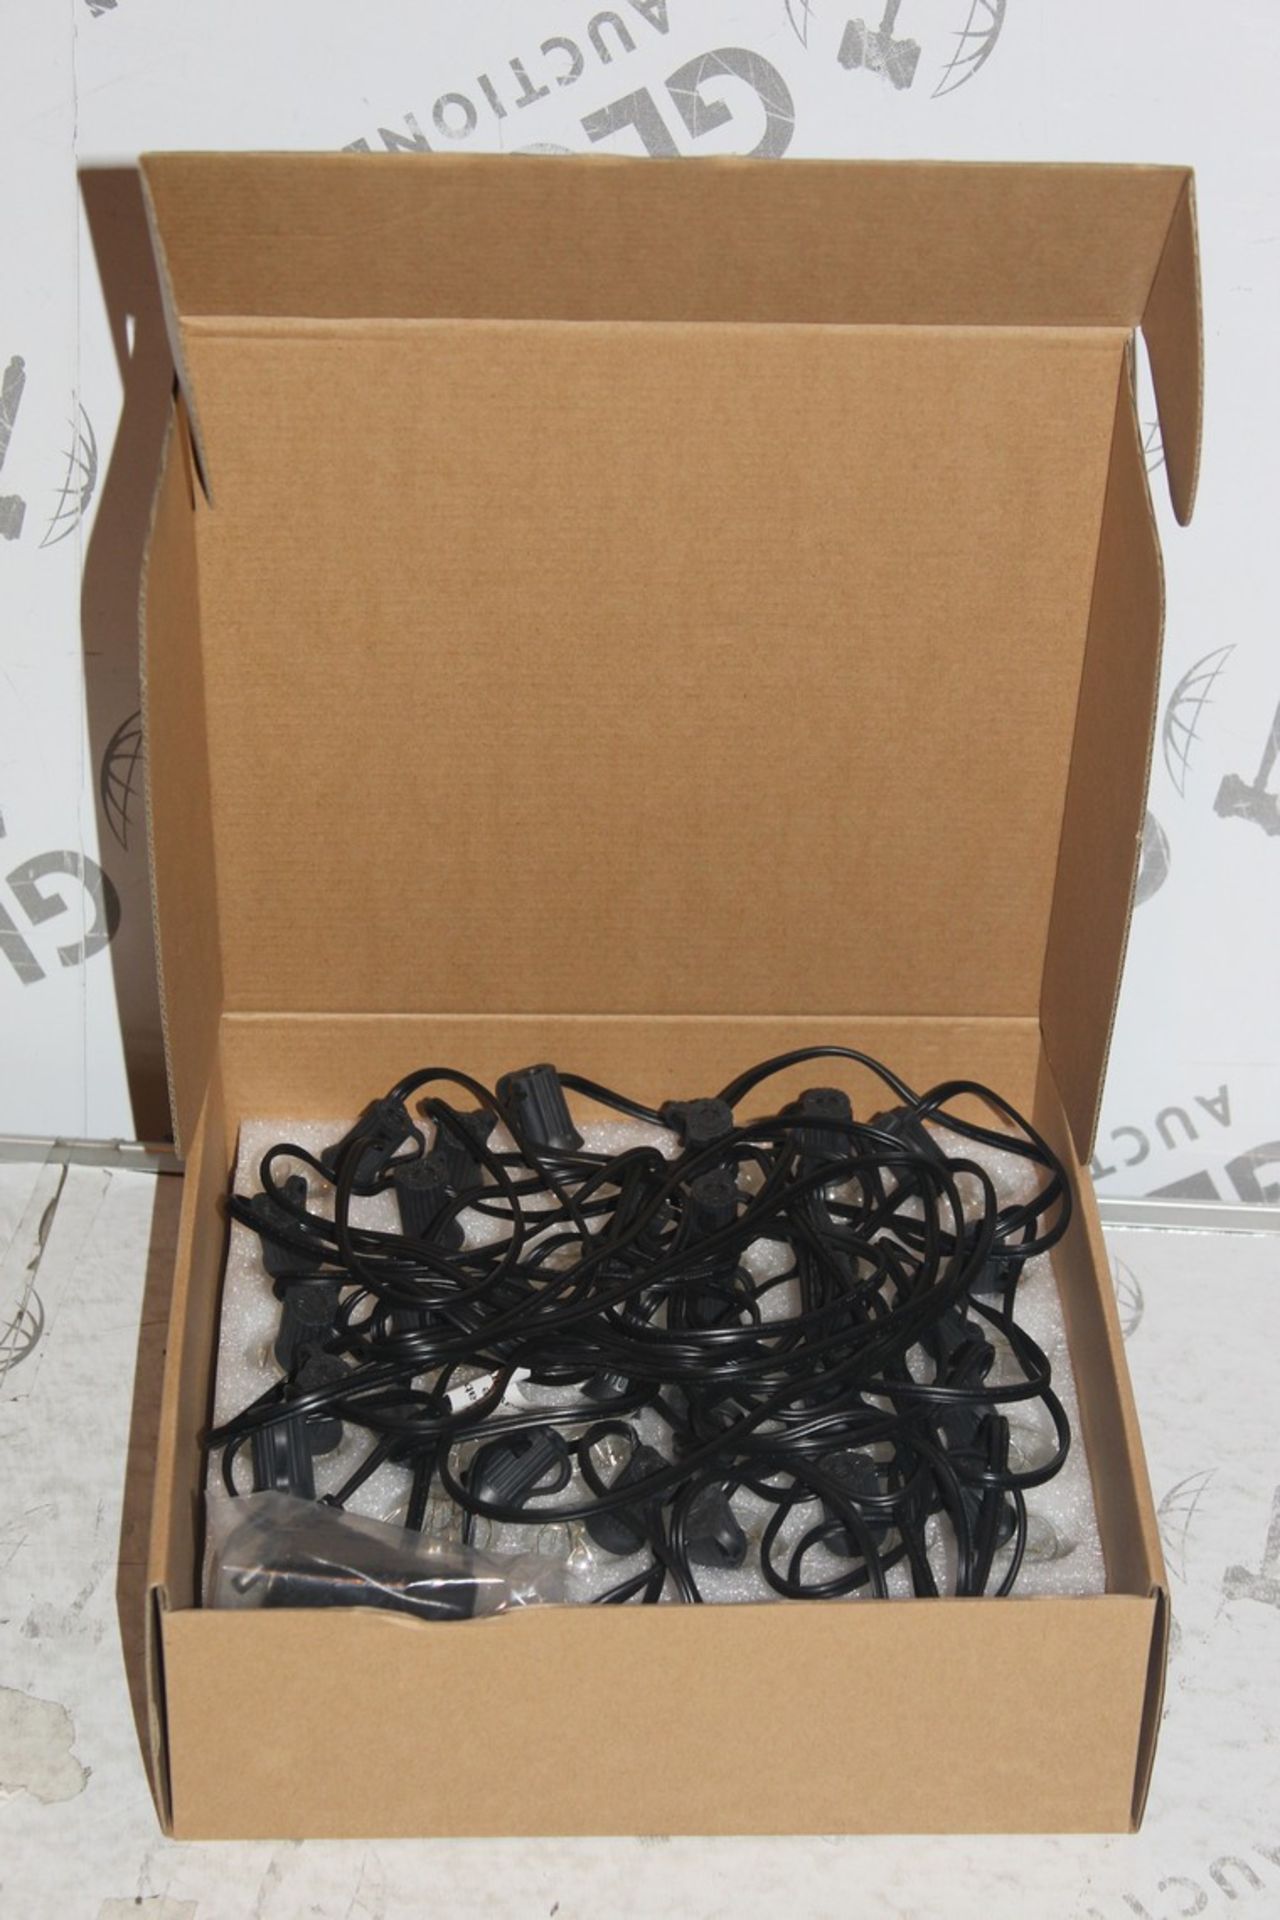 Lot To Contain 4 Boxed Brand New Sets Of Brand New Sets Of G40 Global LED String Lights Combined RRP